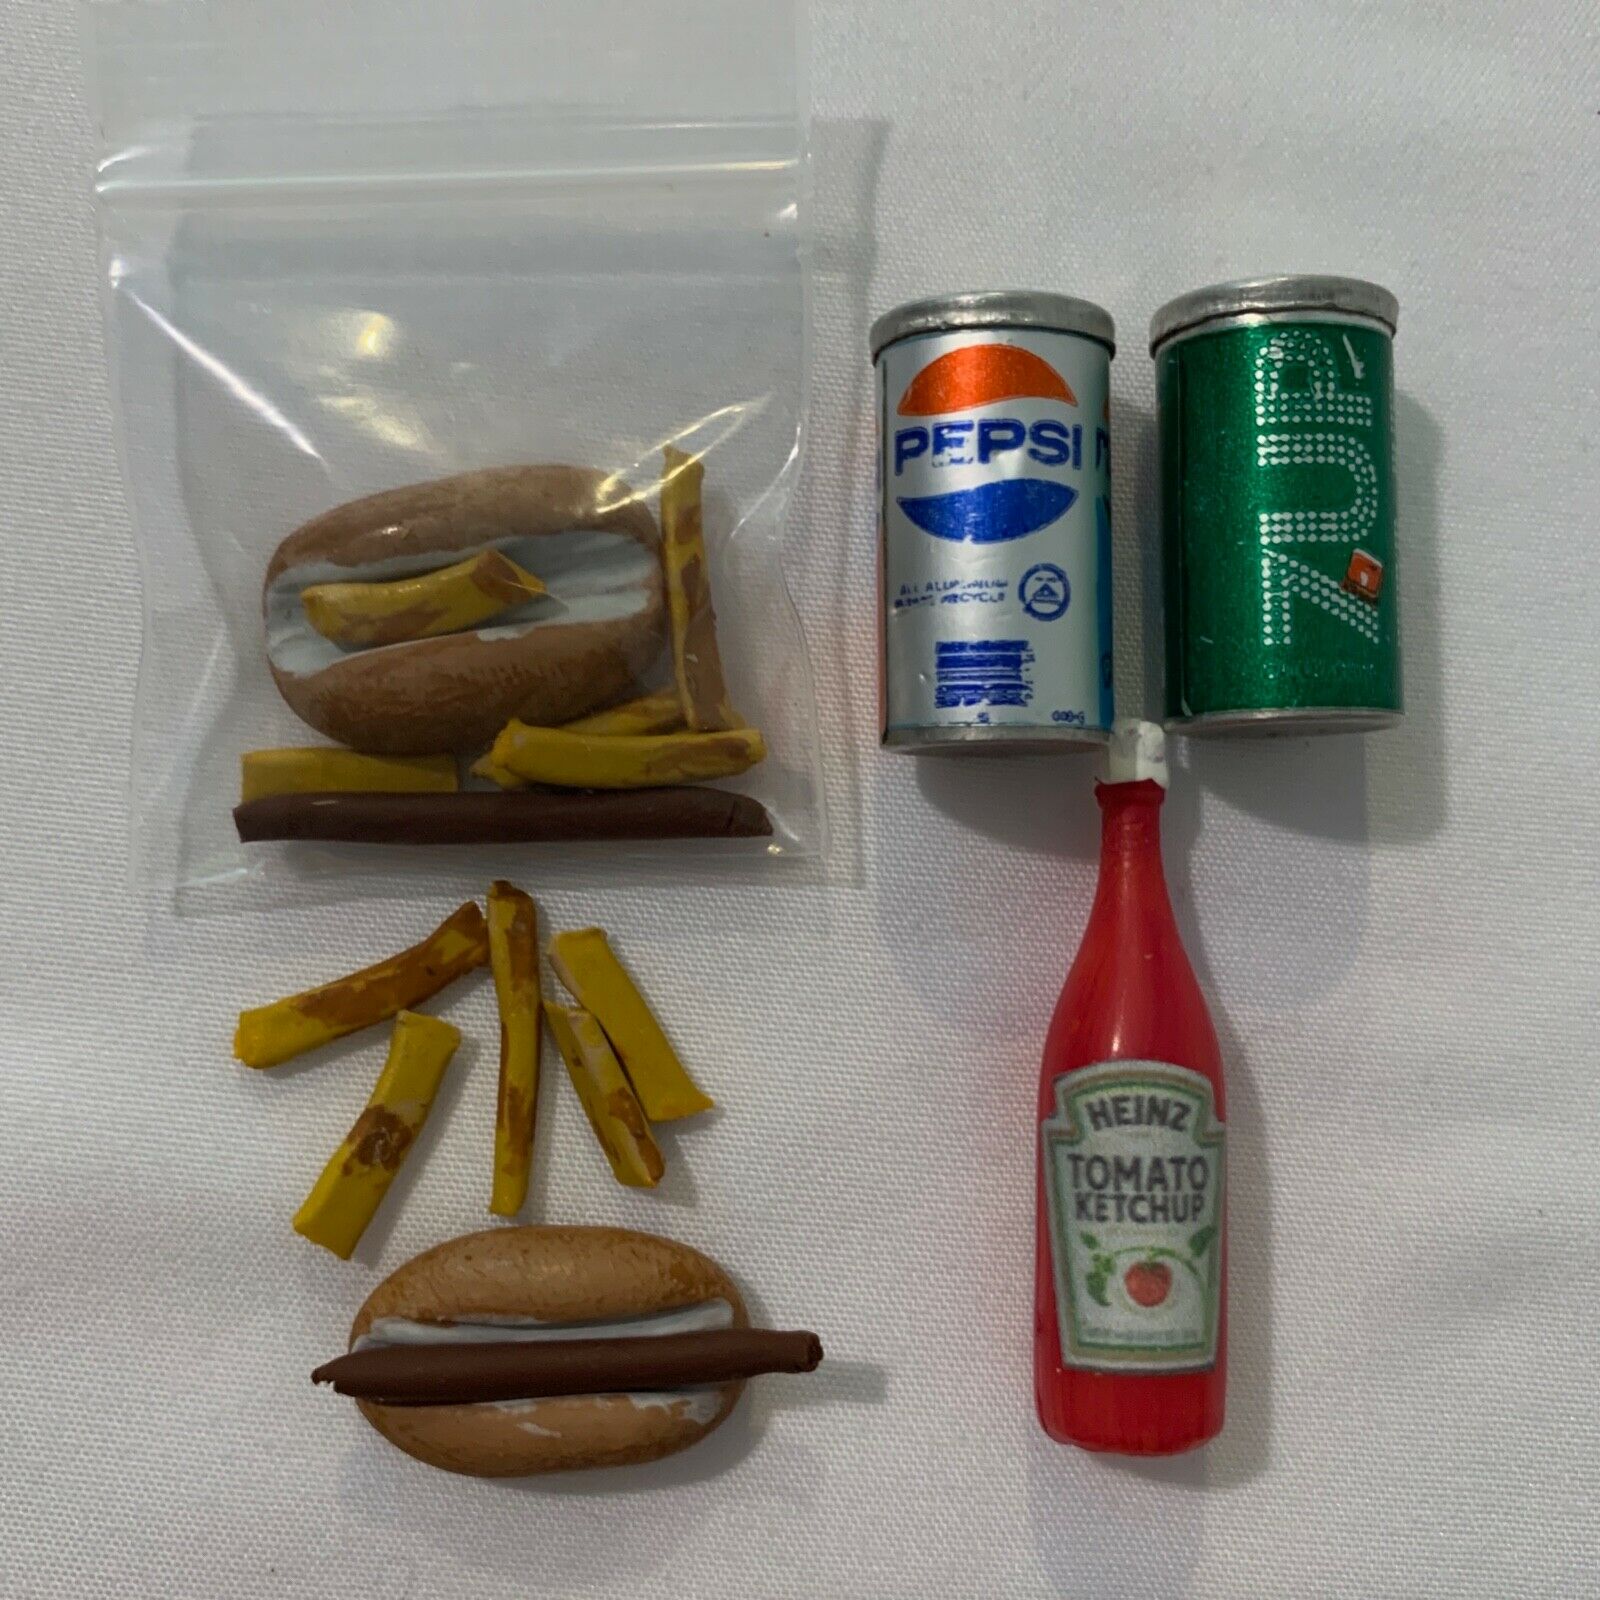 Vintage Barbie Picnic Accessories Lot 1970s Hotdogs Fries Pepsi 7 Up Ketchup